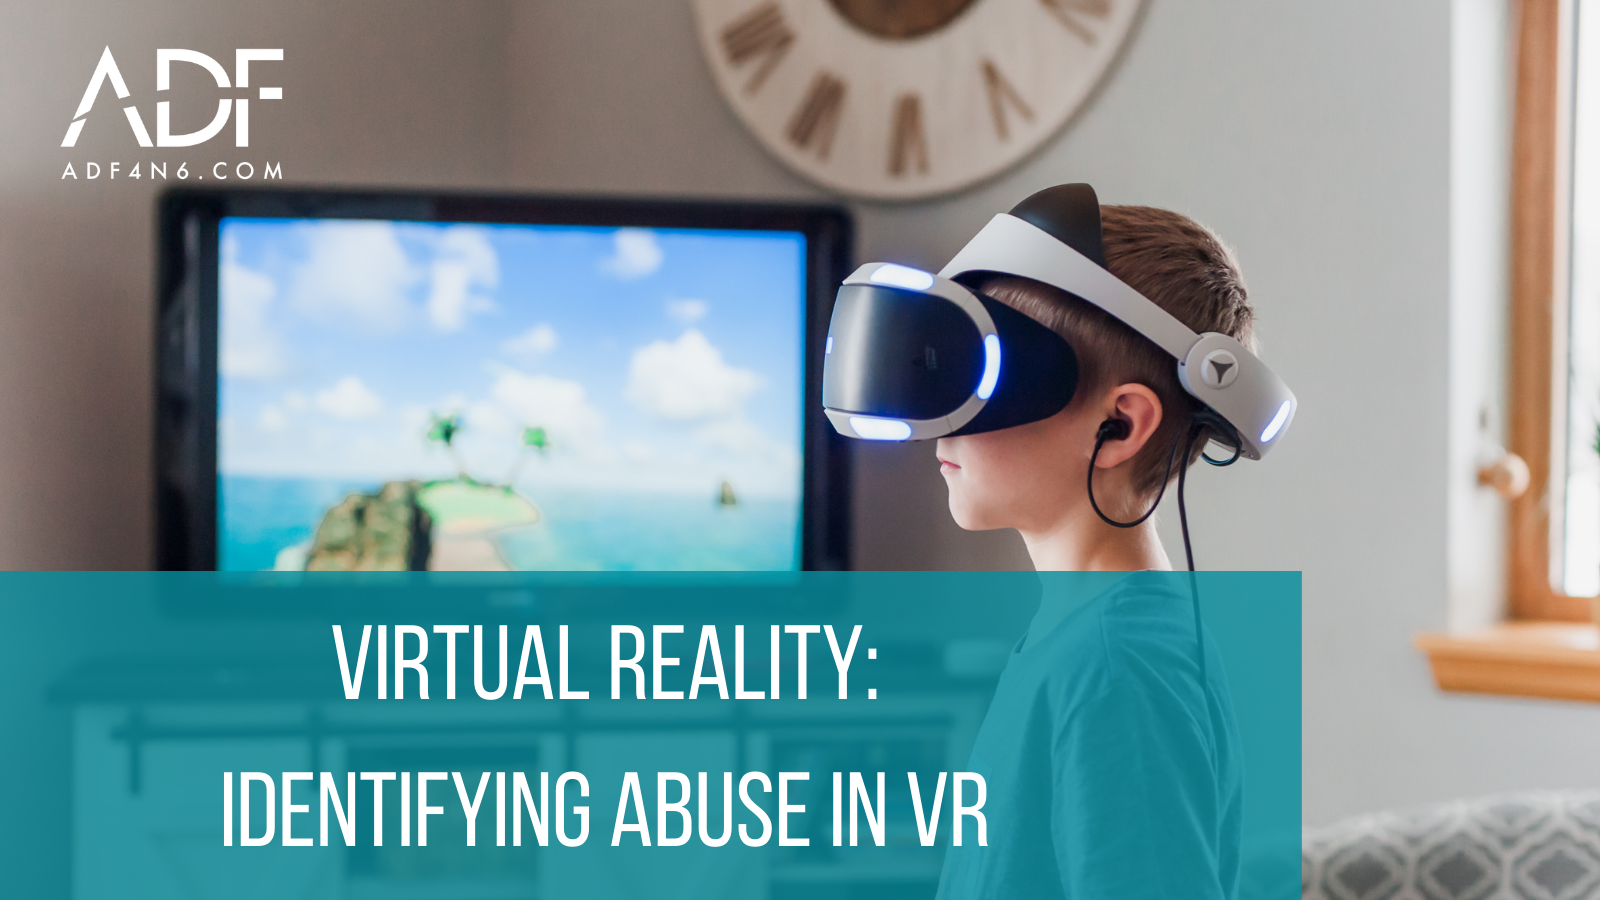 VR is Taking Internet Abuse and Exploitation to New Levels